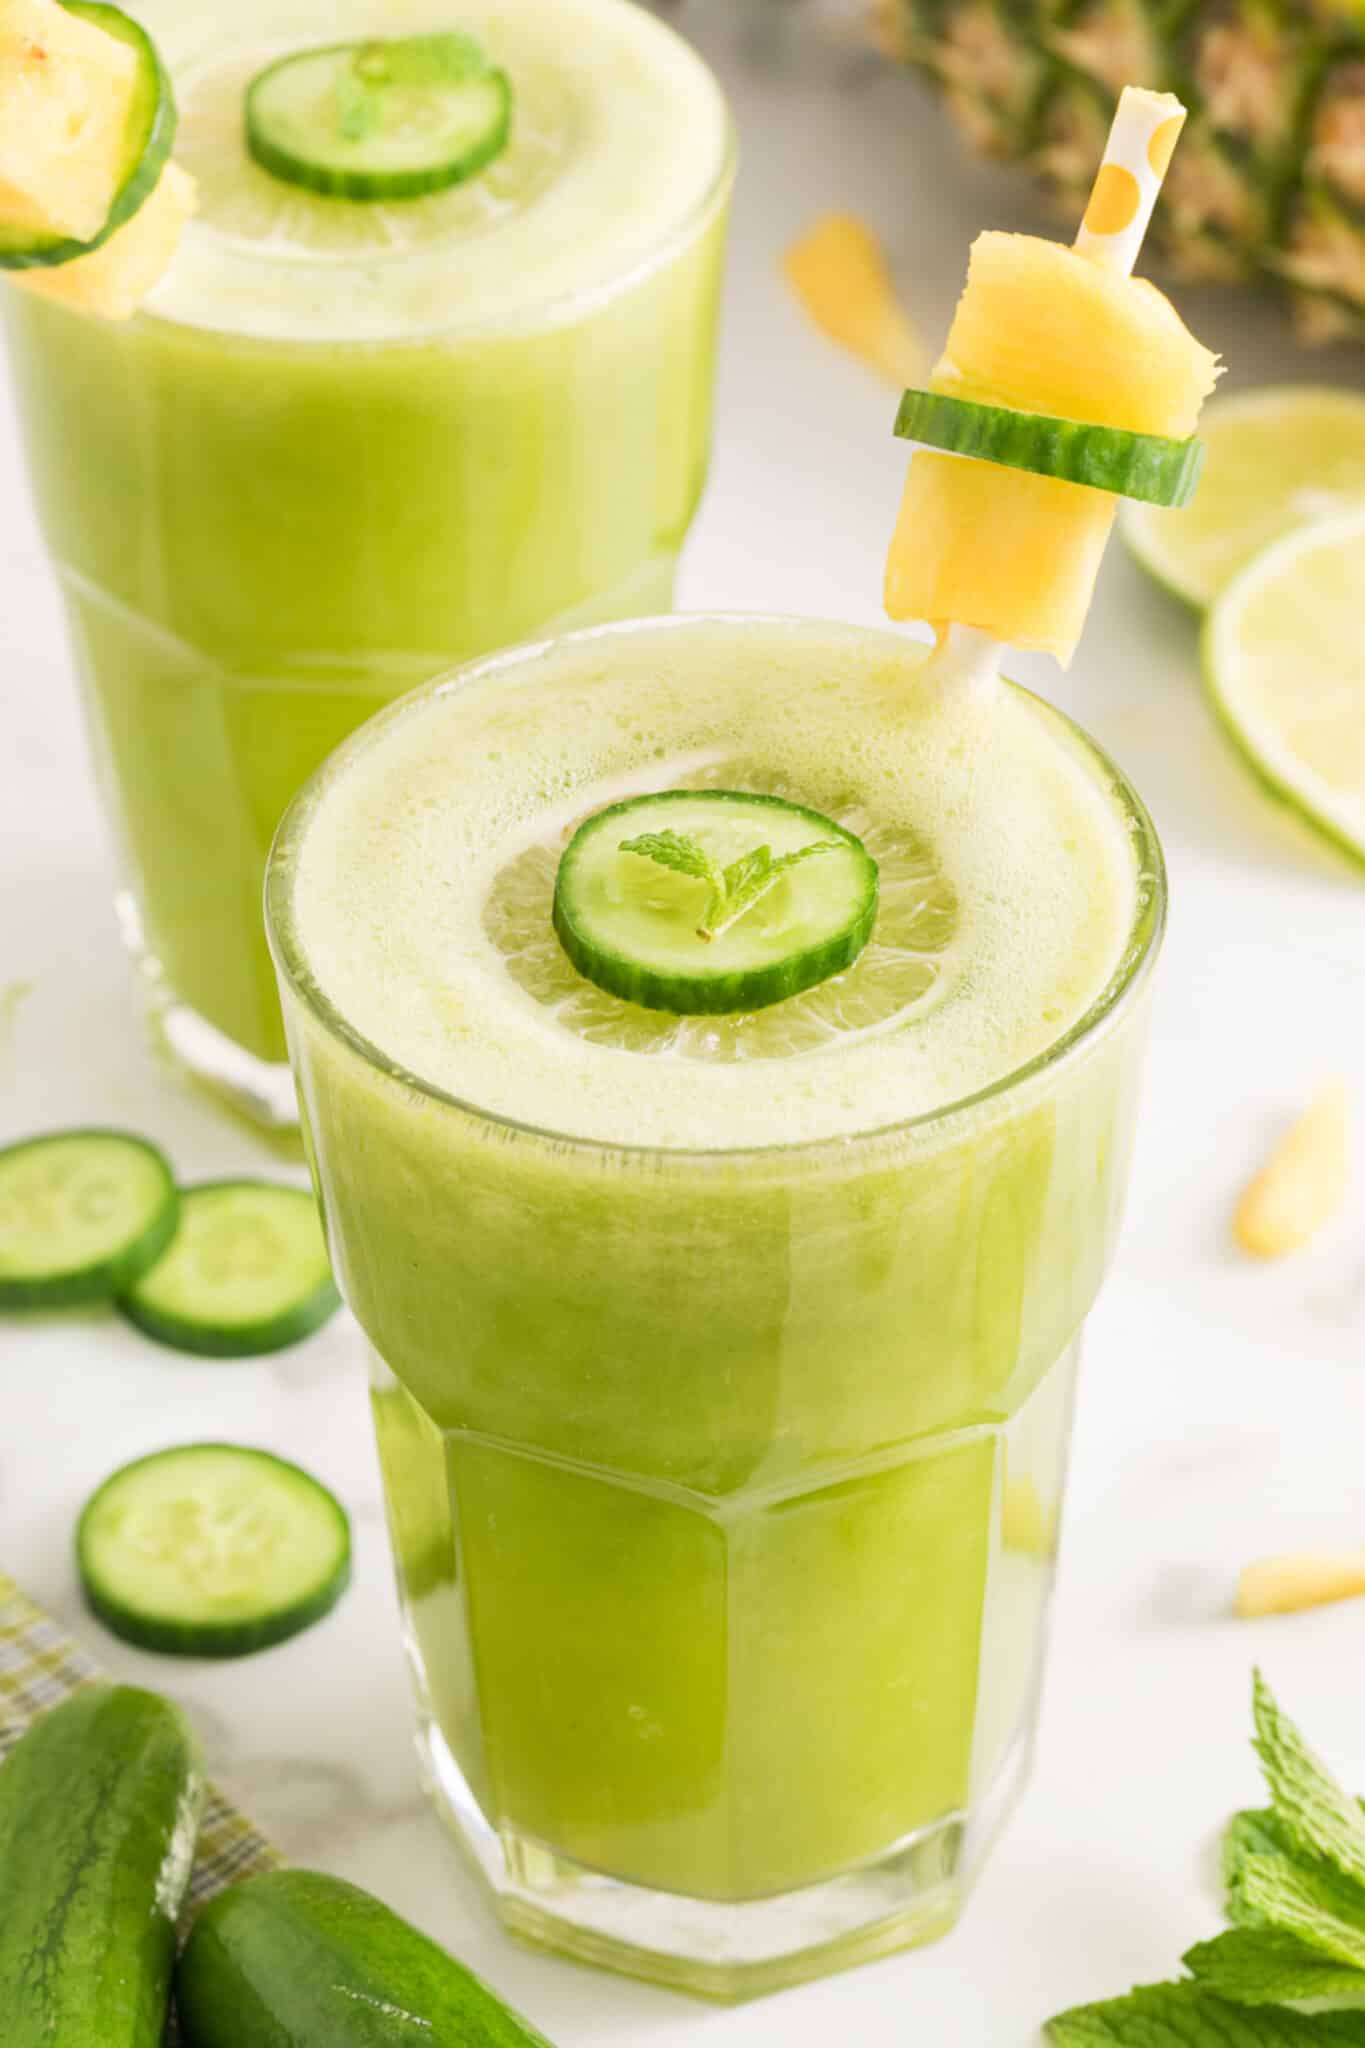 Cucumber pineapple smoothie with a cucumber slice floating on top.